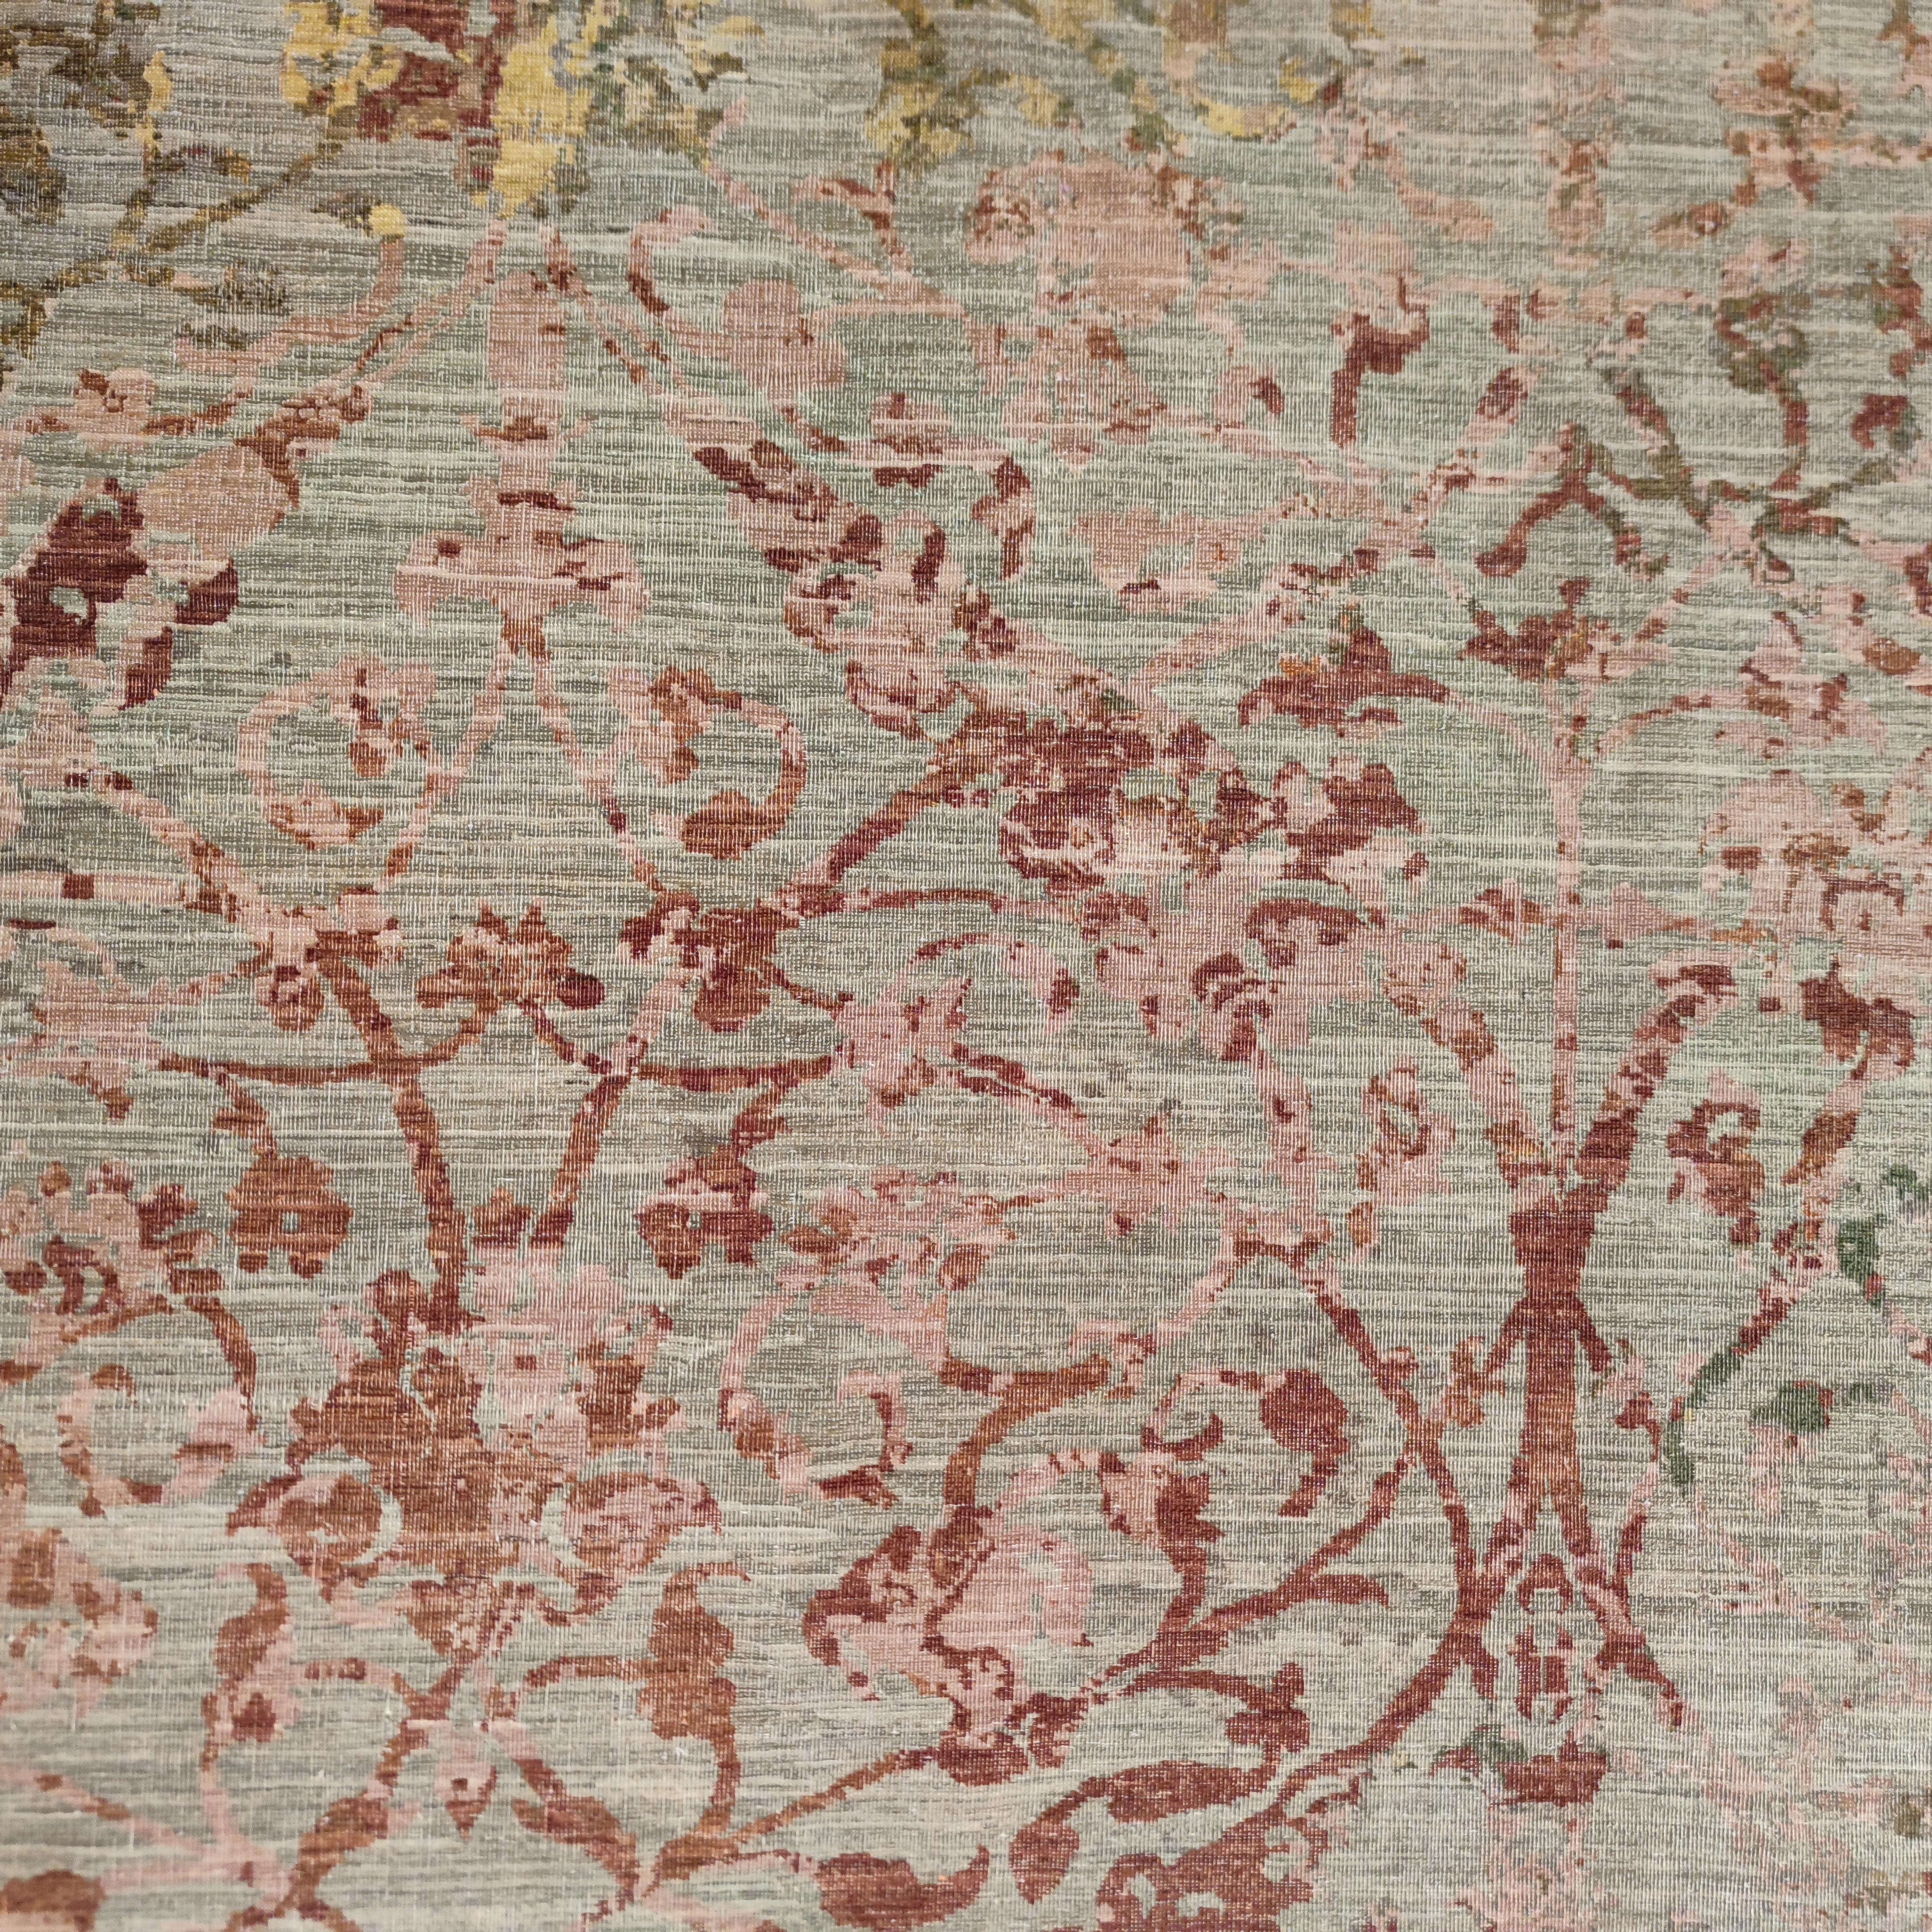 Siena is part of that fascinating world of faded-over-time rugs. From traditional to transitional, this look celebrates faded, worn and softened textiles over time. Stunning muted colour schemes and subtle patterning run throughout, creating the